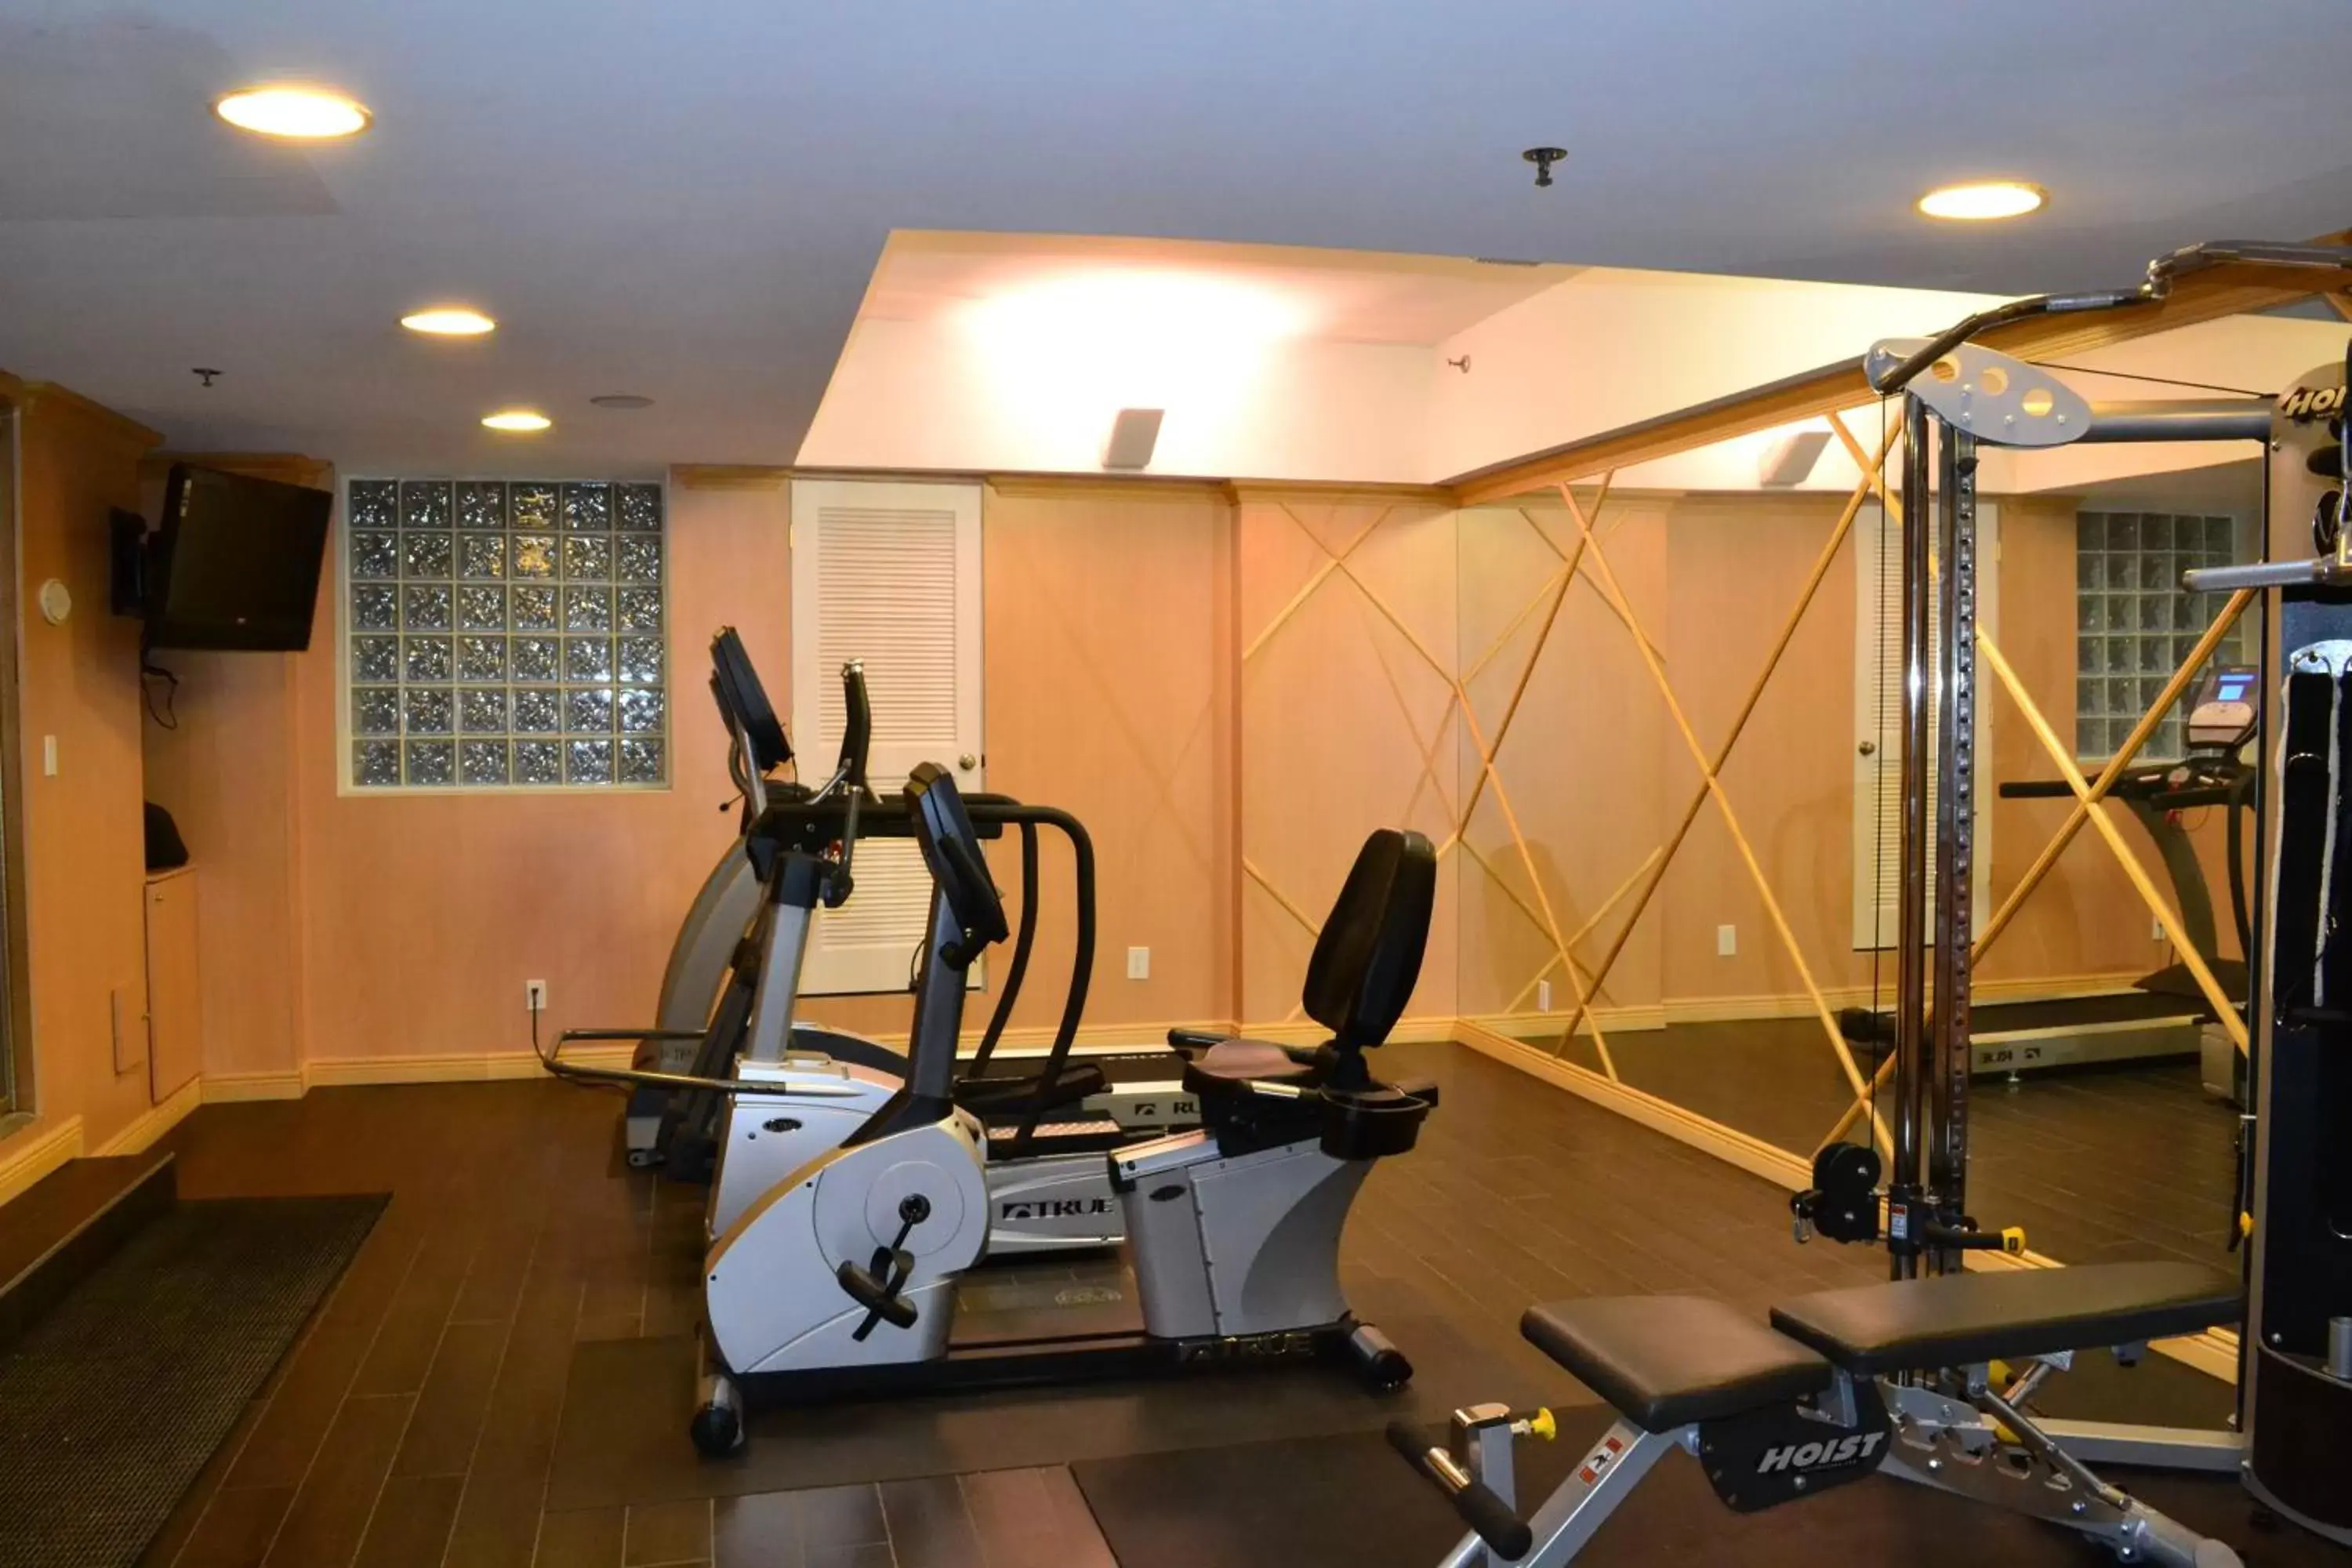 Fitness centre/facilities, Fitness Center/Facilities in The Wall Street Inn